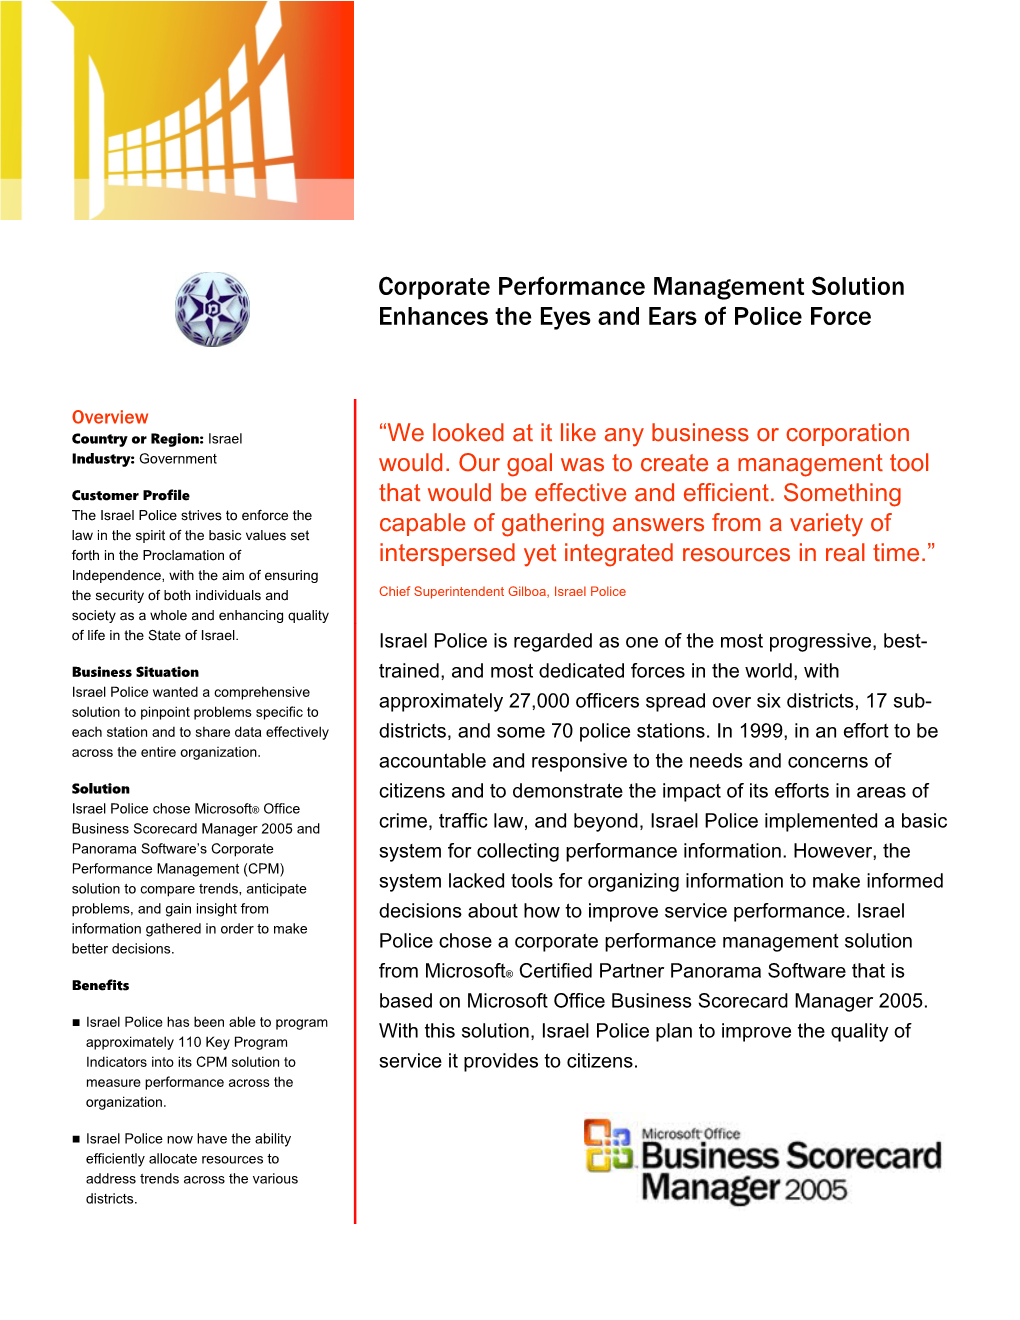 Corporate Performance Management Solution Enhances the Eyes and Ears of Police Force